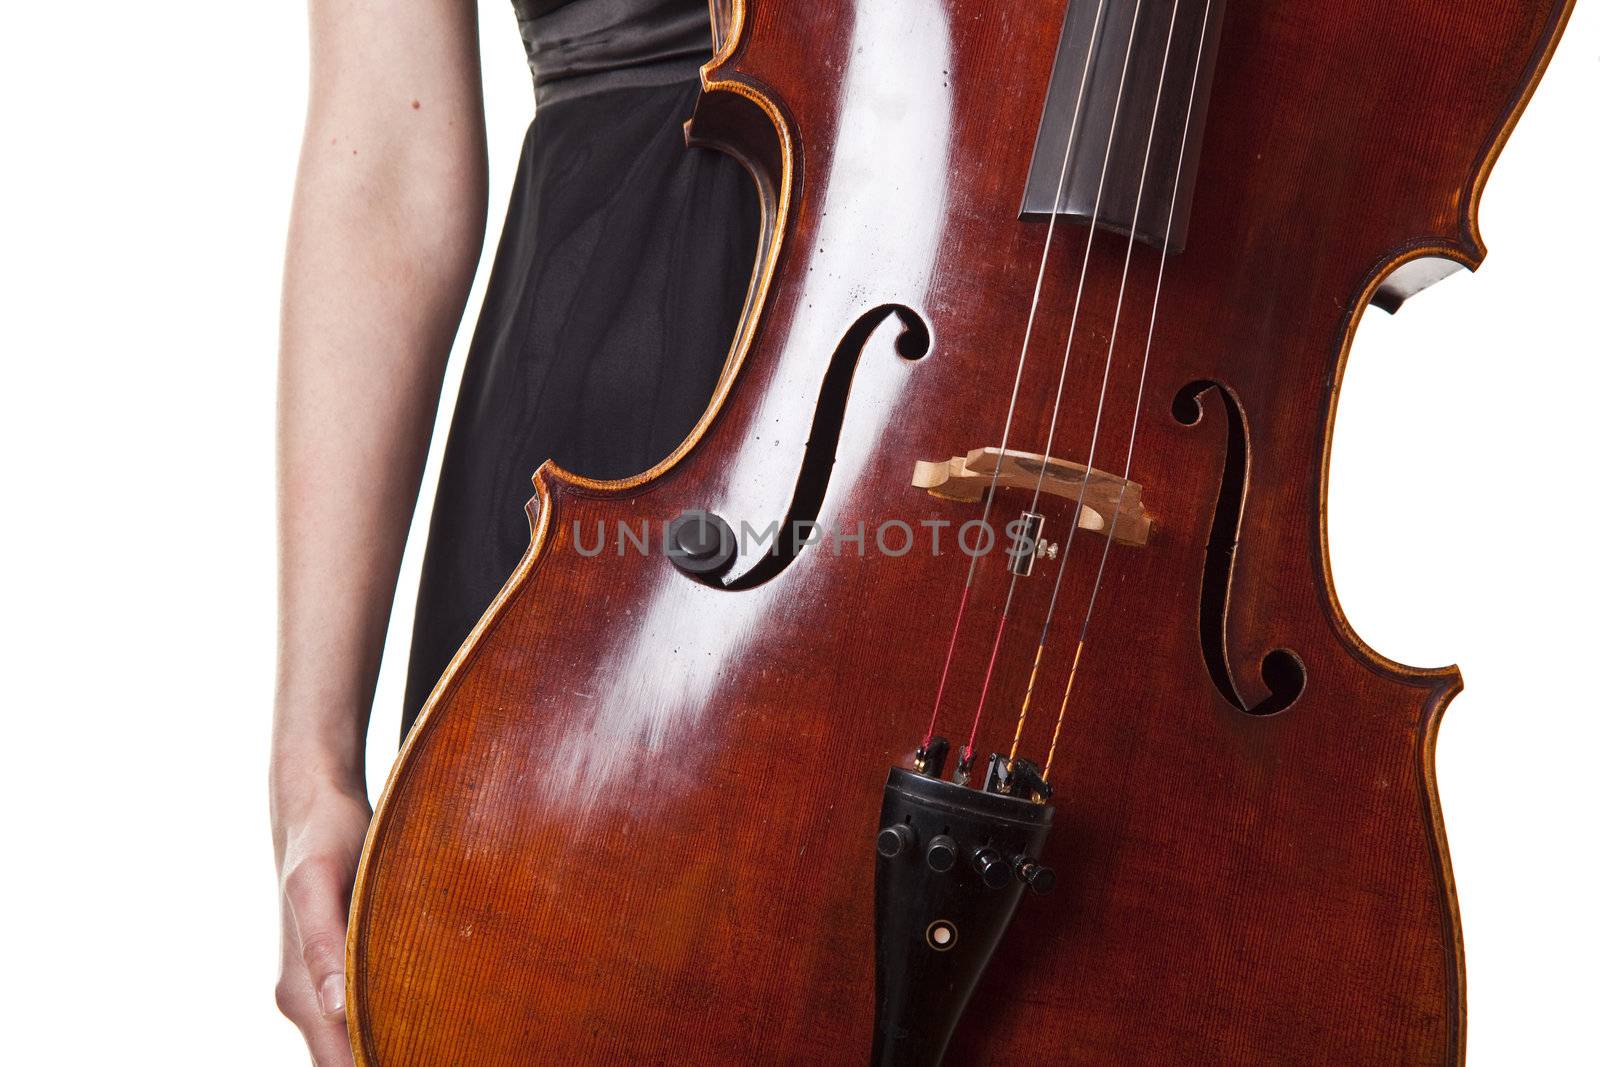 Woman in black dress holding violoncello in hand